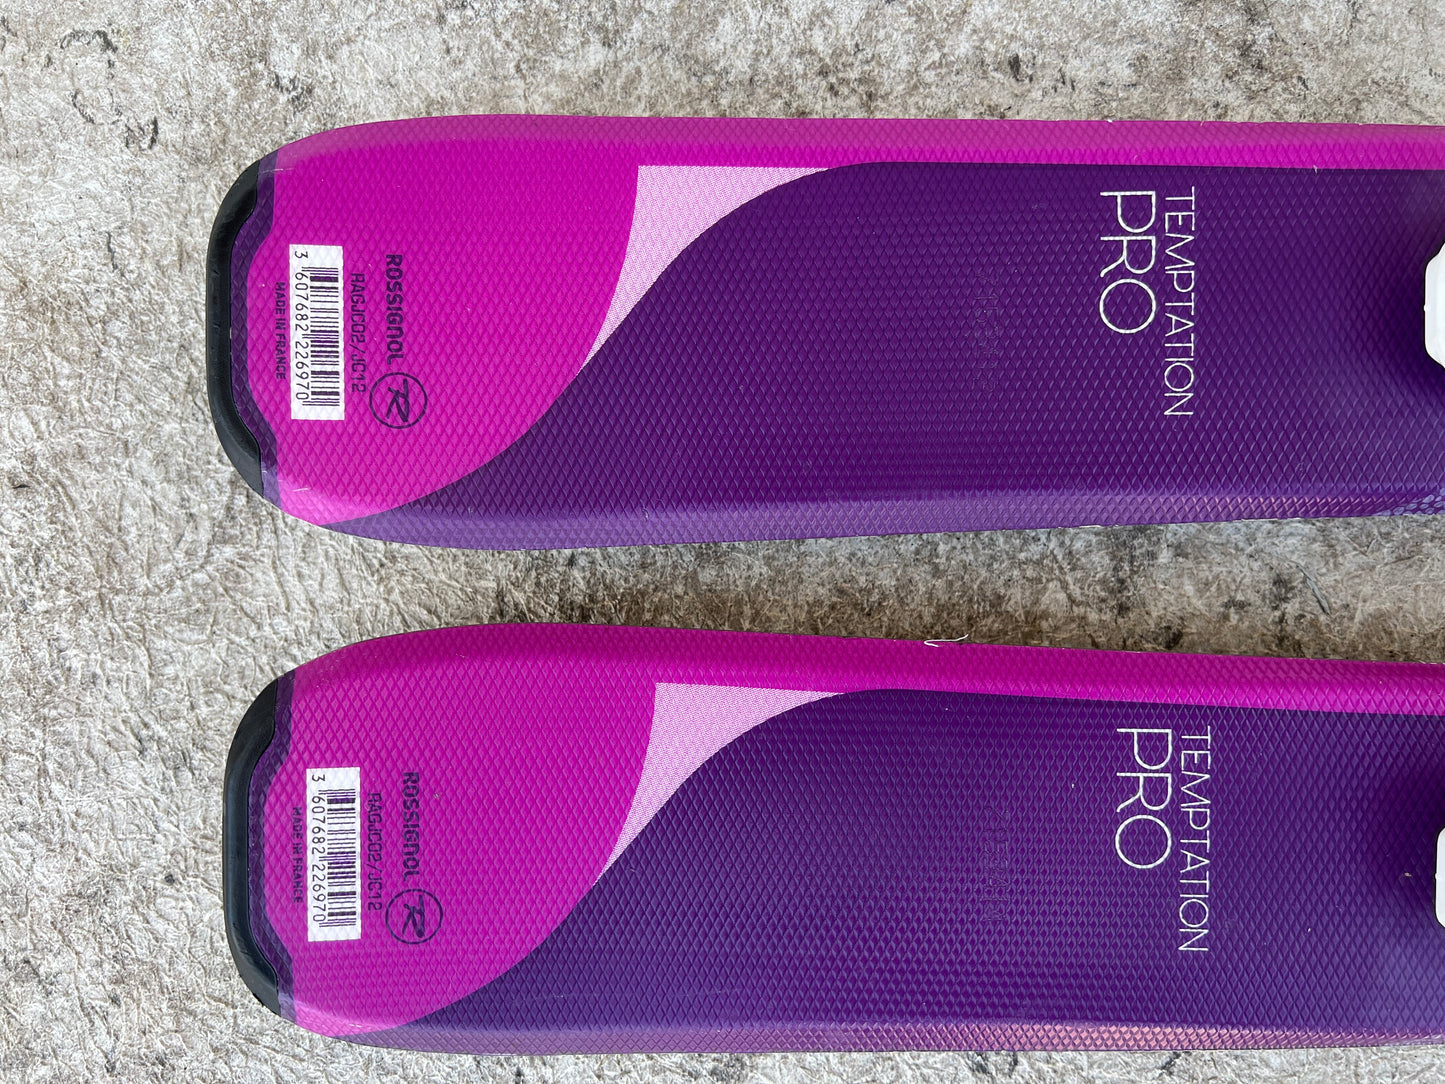 Ski 116 Rossignol Temptation Parabolic Pink Purple With Bindings Excellent